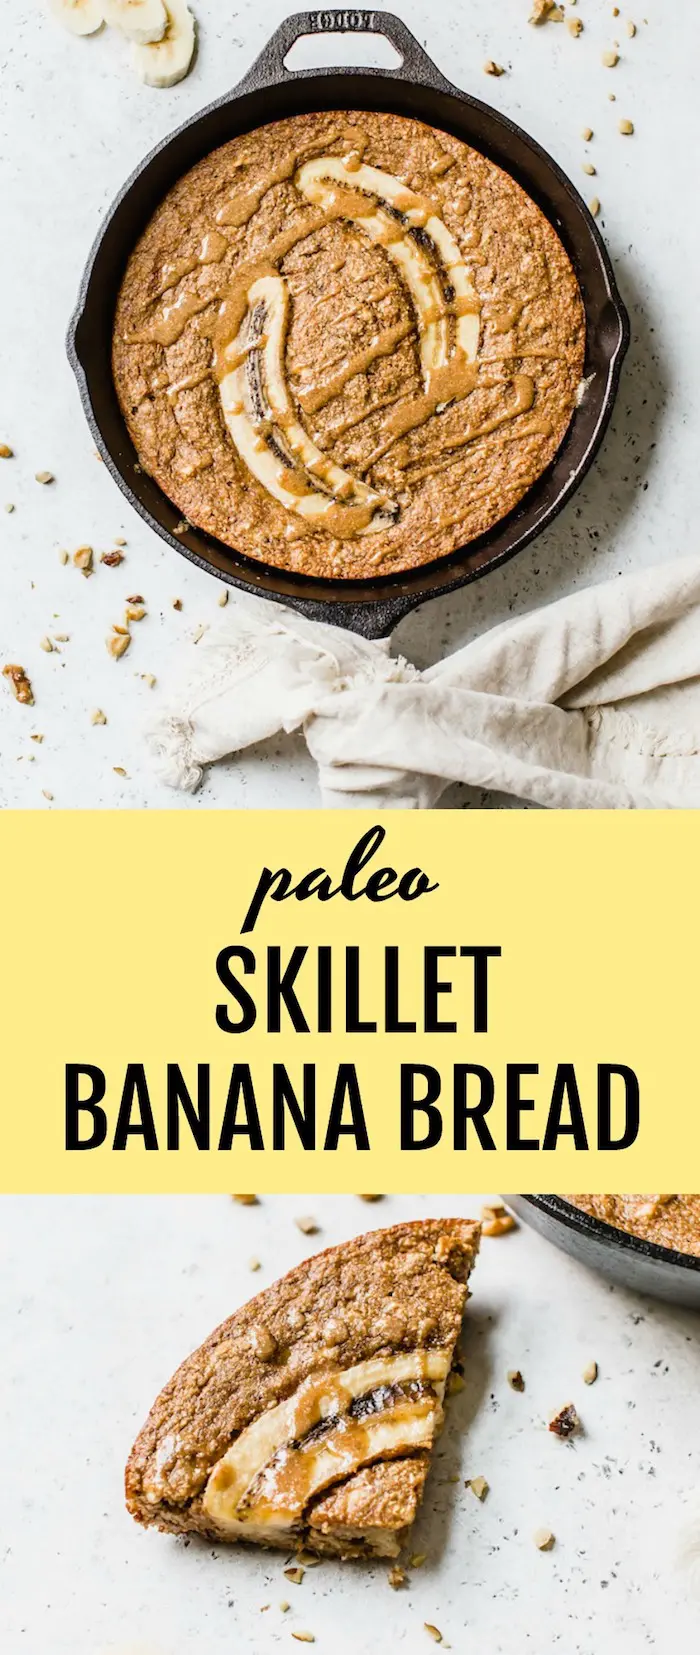 Paleo Skillet Banana Bread- banana bread that's gluten free, refined sugar free and better for you with all the tasty banana flavor you're craving | thealmondeater.com